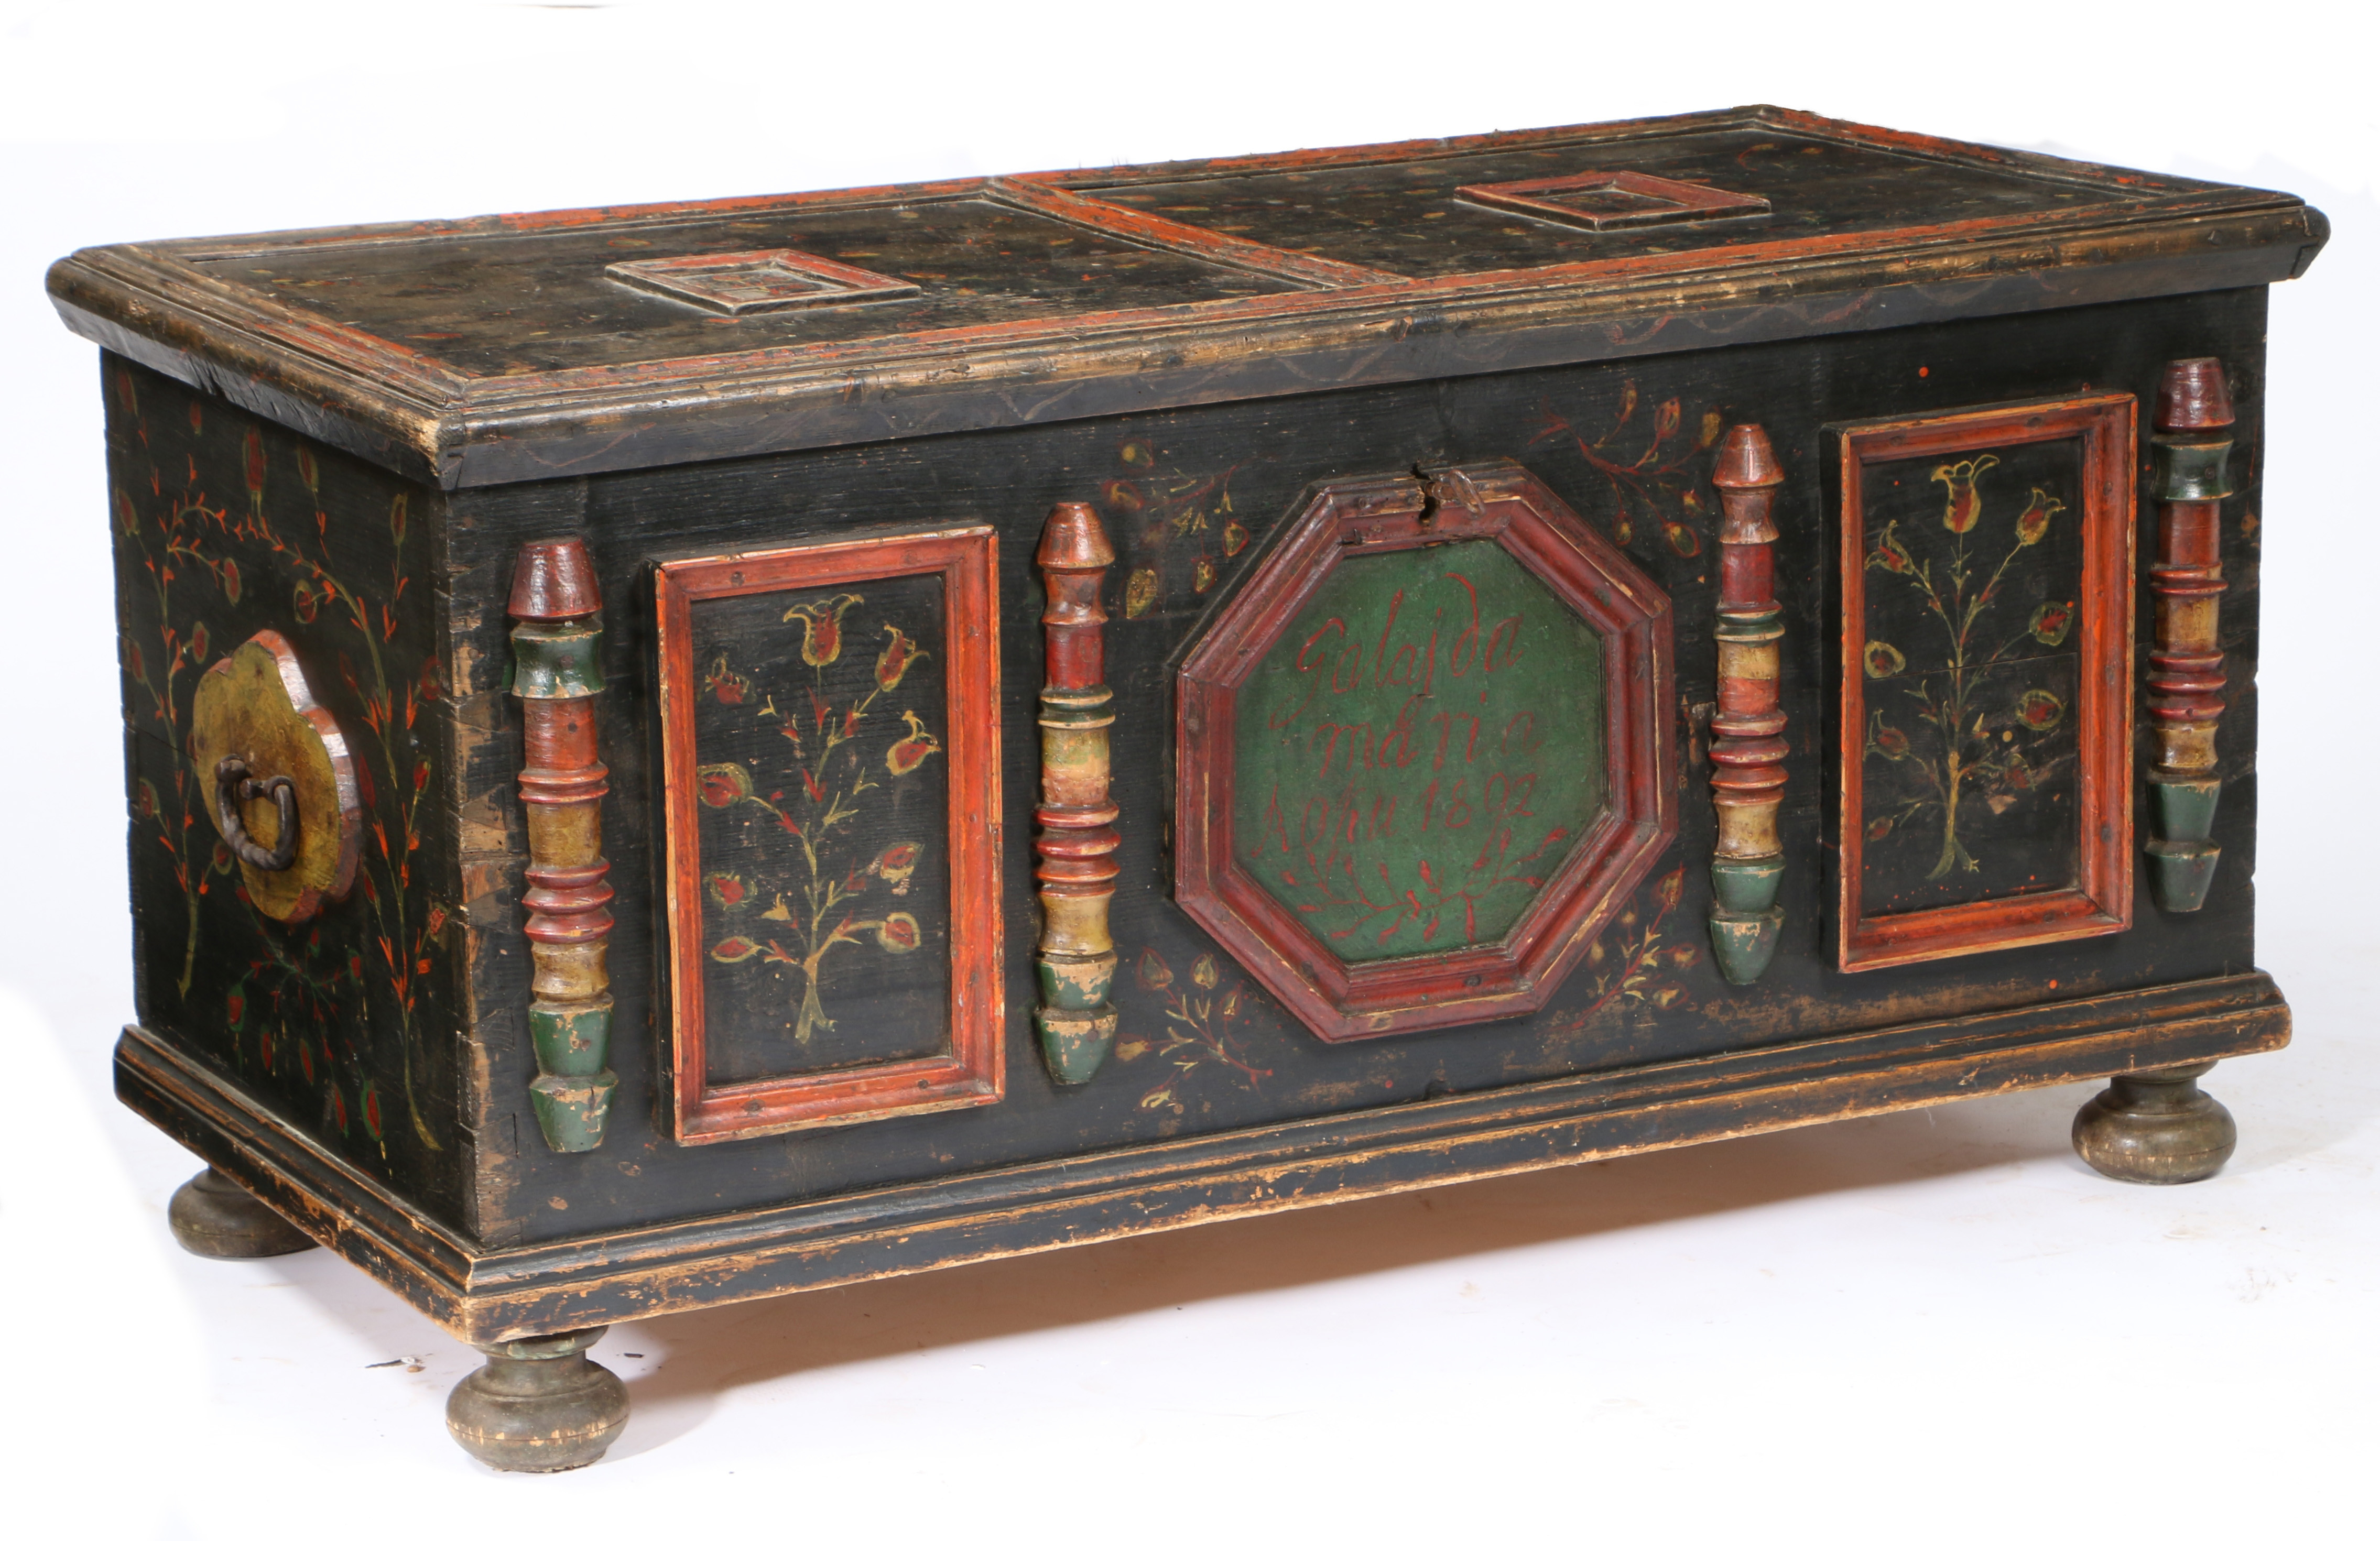 A 19TH CENTURY EUROPEAN PAINTED PINE MARRIAGE CHEST. - Image 2 of 4